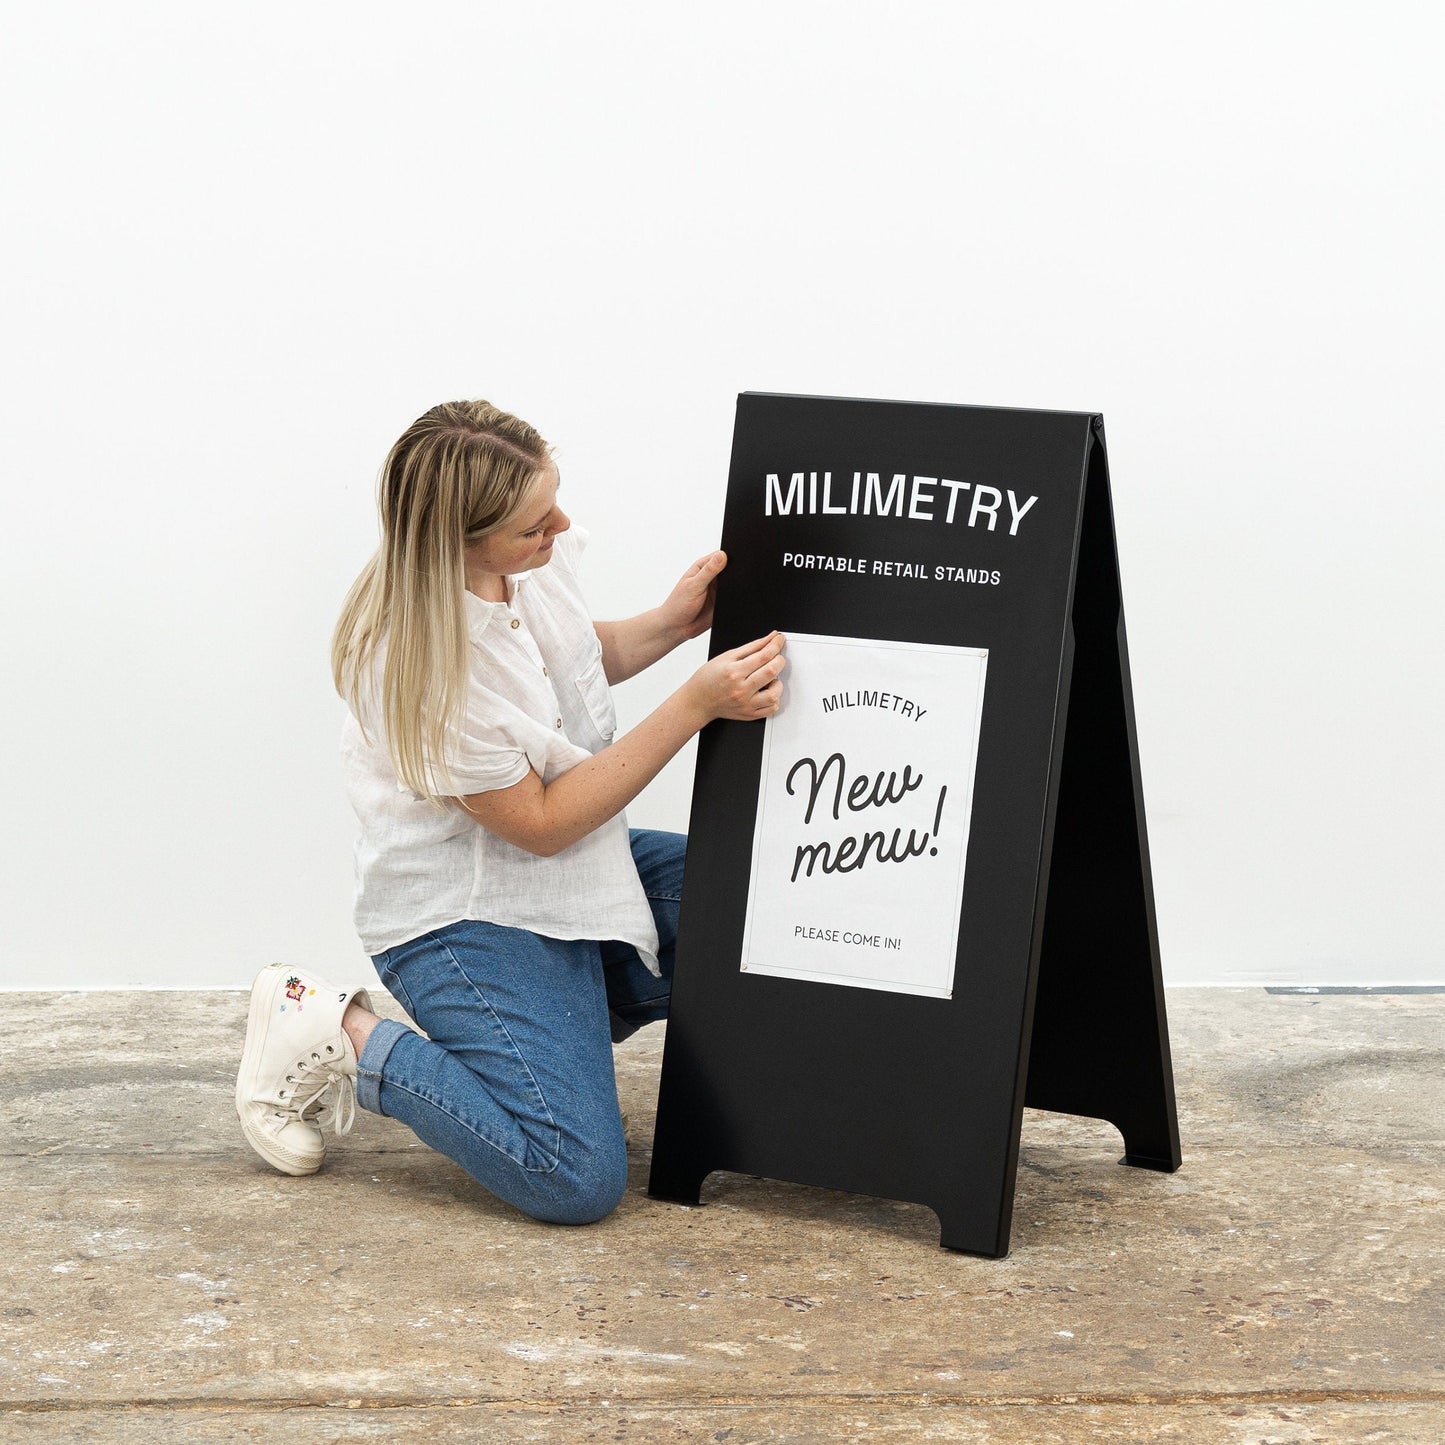 Metal magnetic advertising board, sandwich board, A-board for outdoor use, for restaurants, bars, shops and events